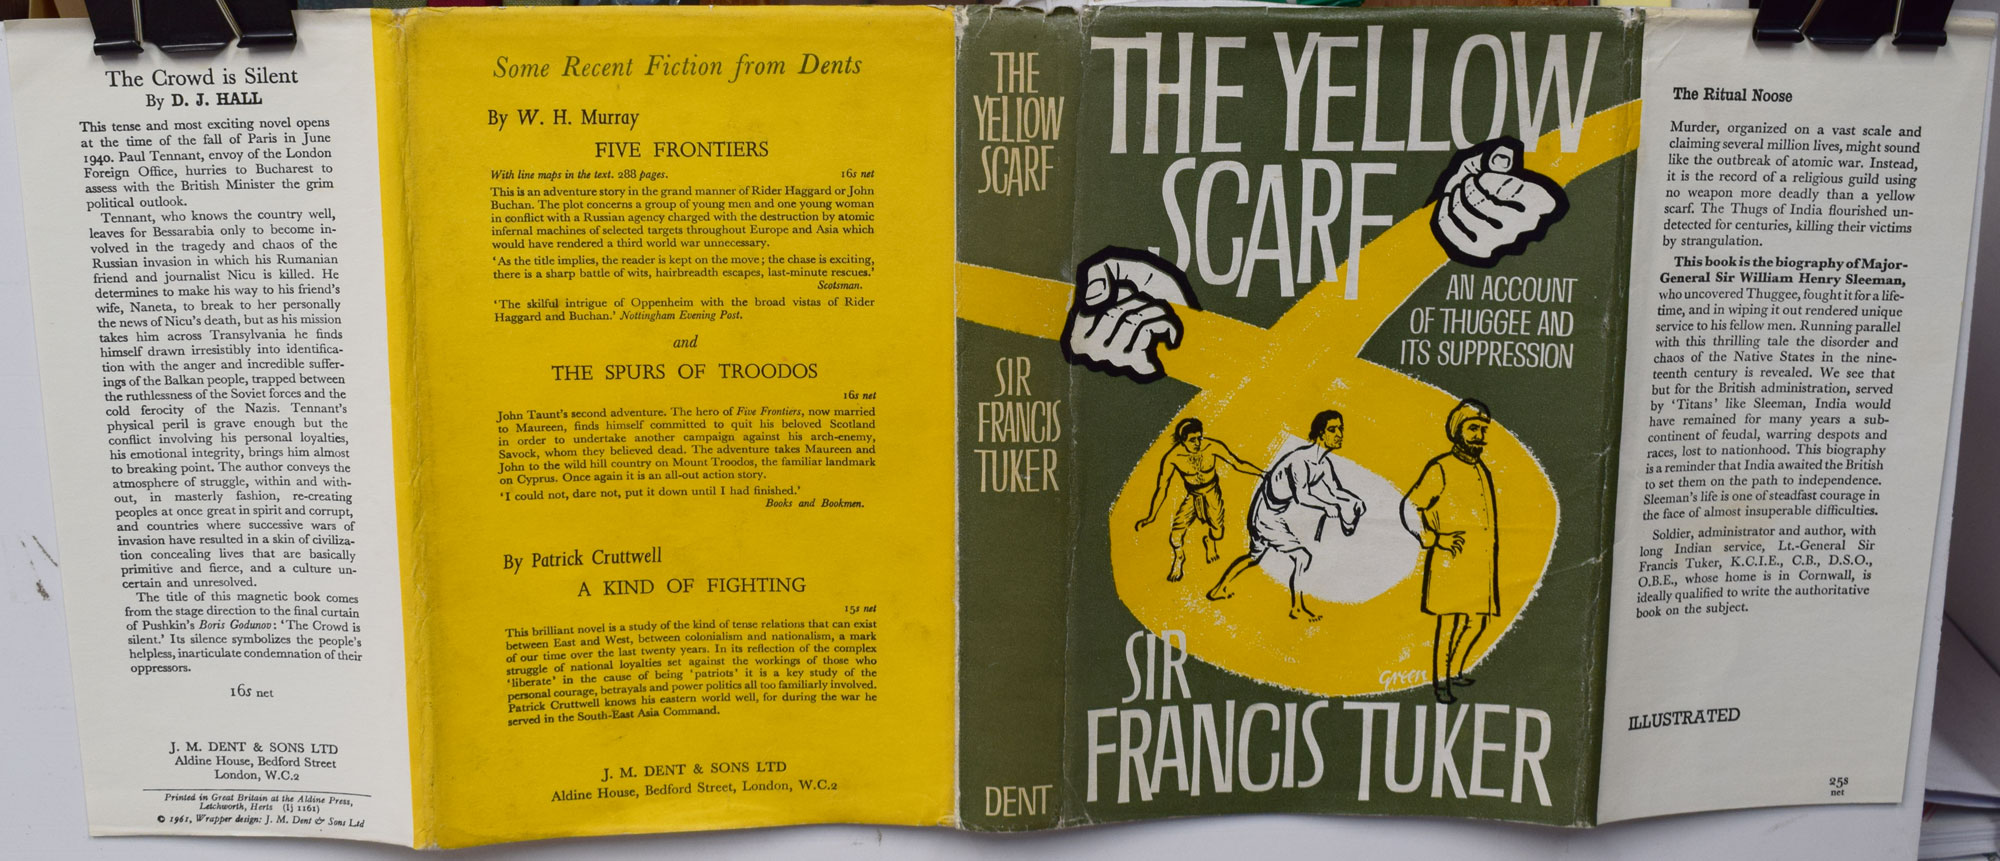 The Yellow Scarf. The Story of the Life of Thuggee Sleeman. Signed Association Copy.